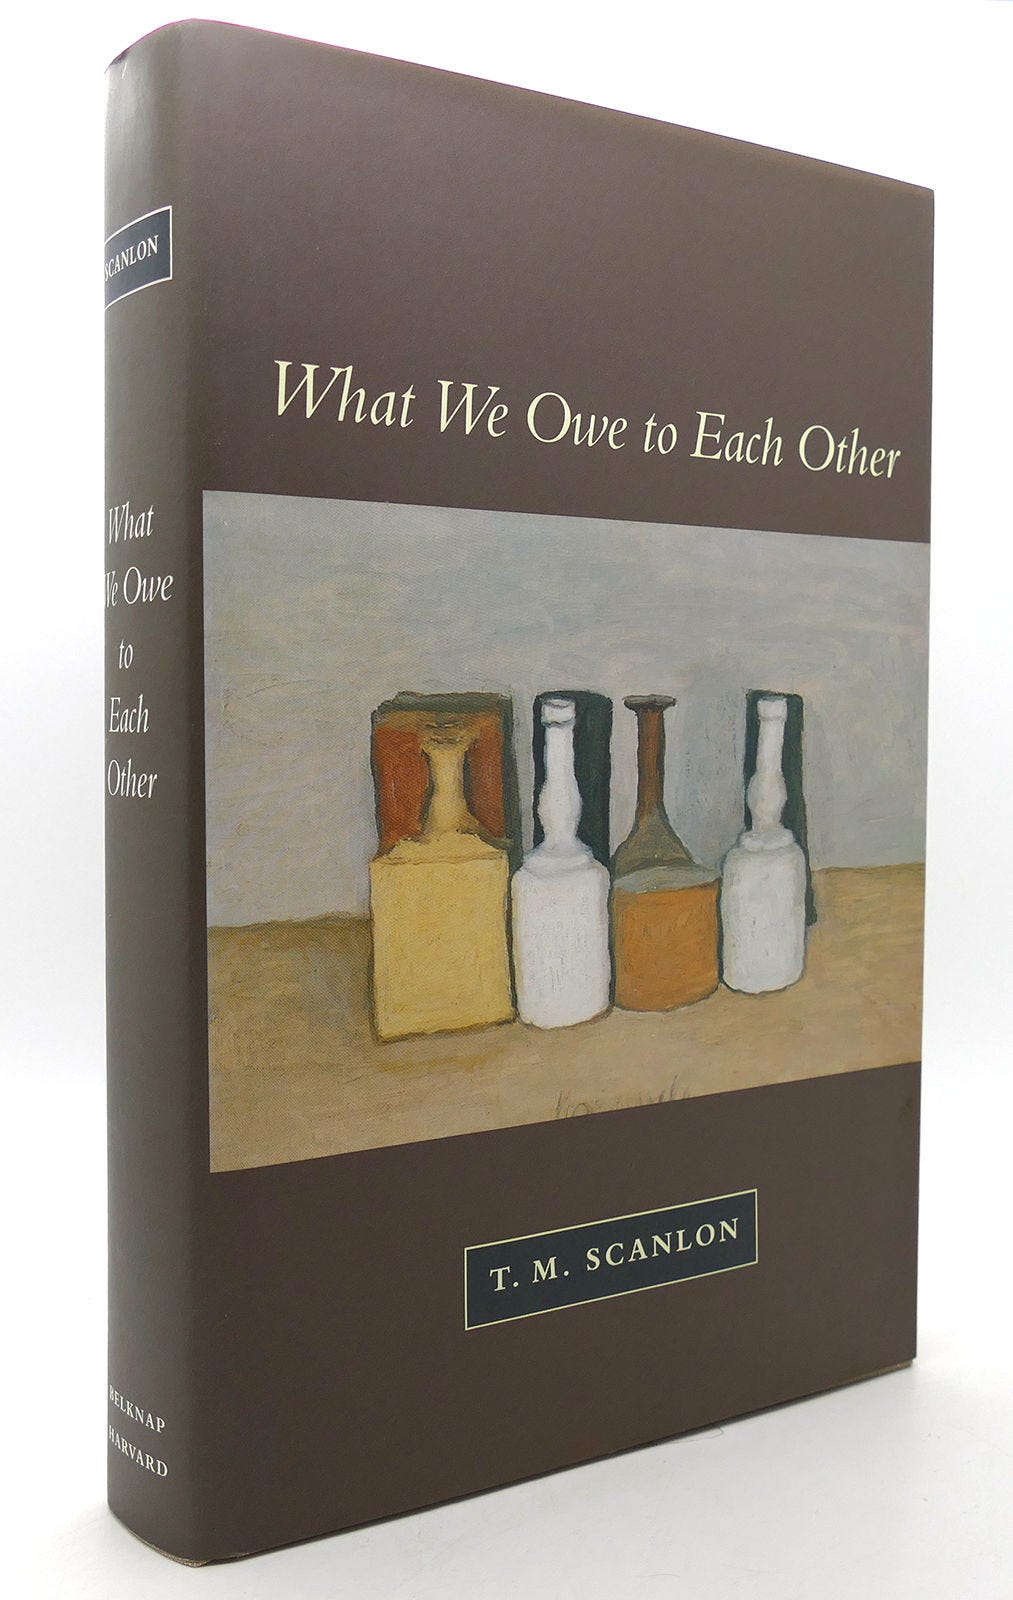 WHAT WE OWE TO EACH OTHER by T. M. Scanlon - 1998